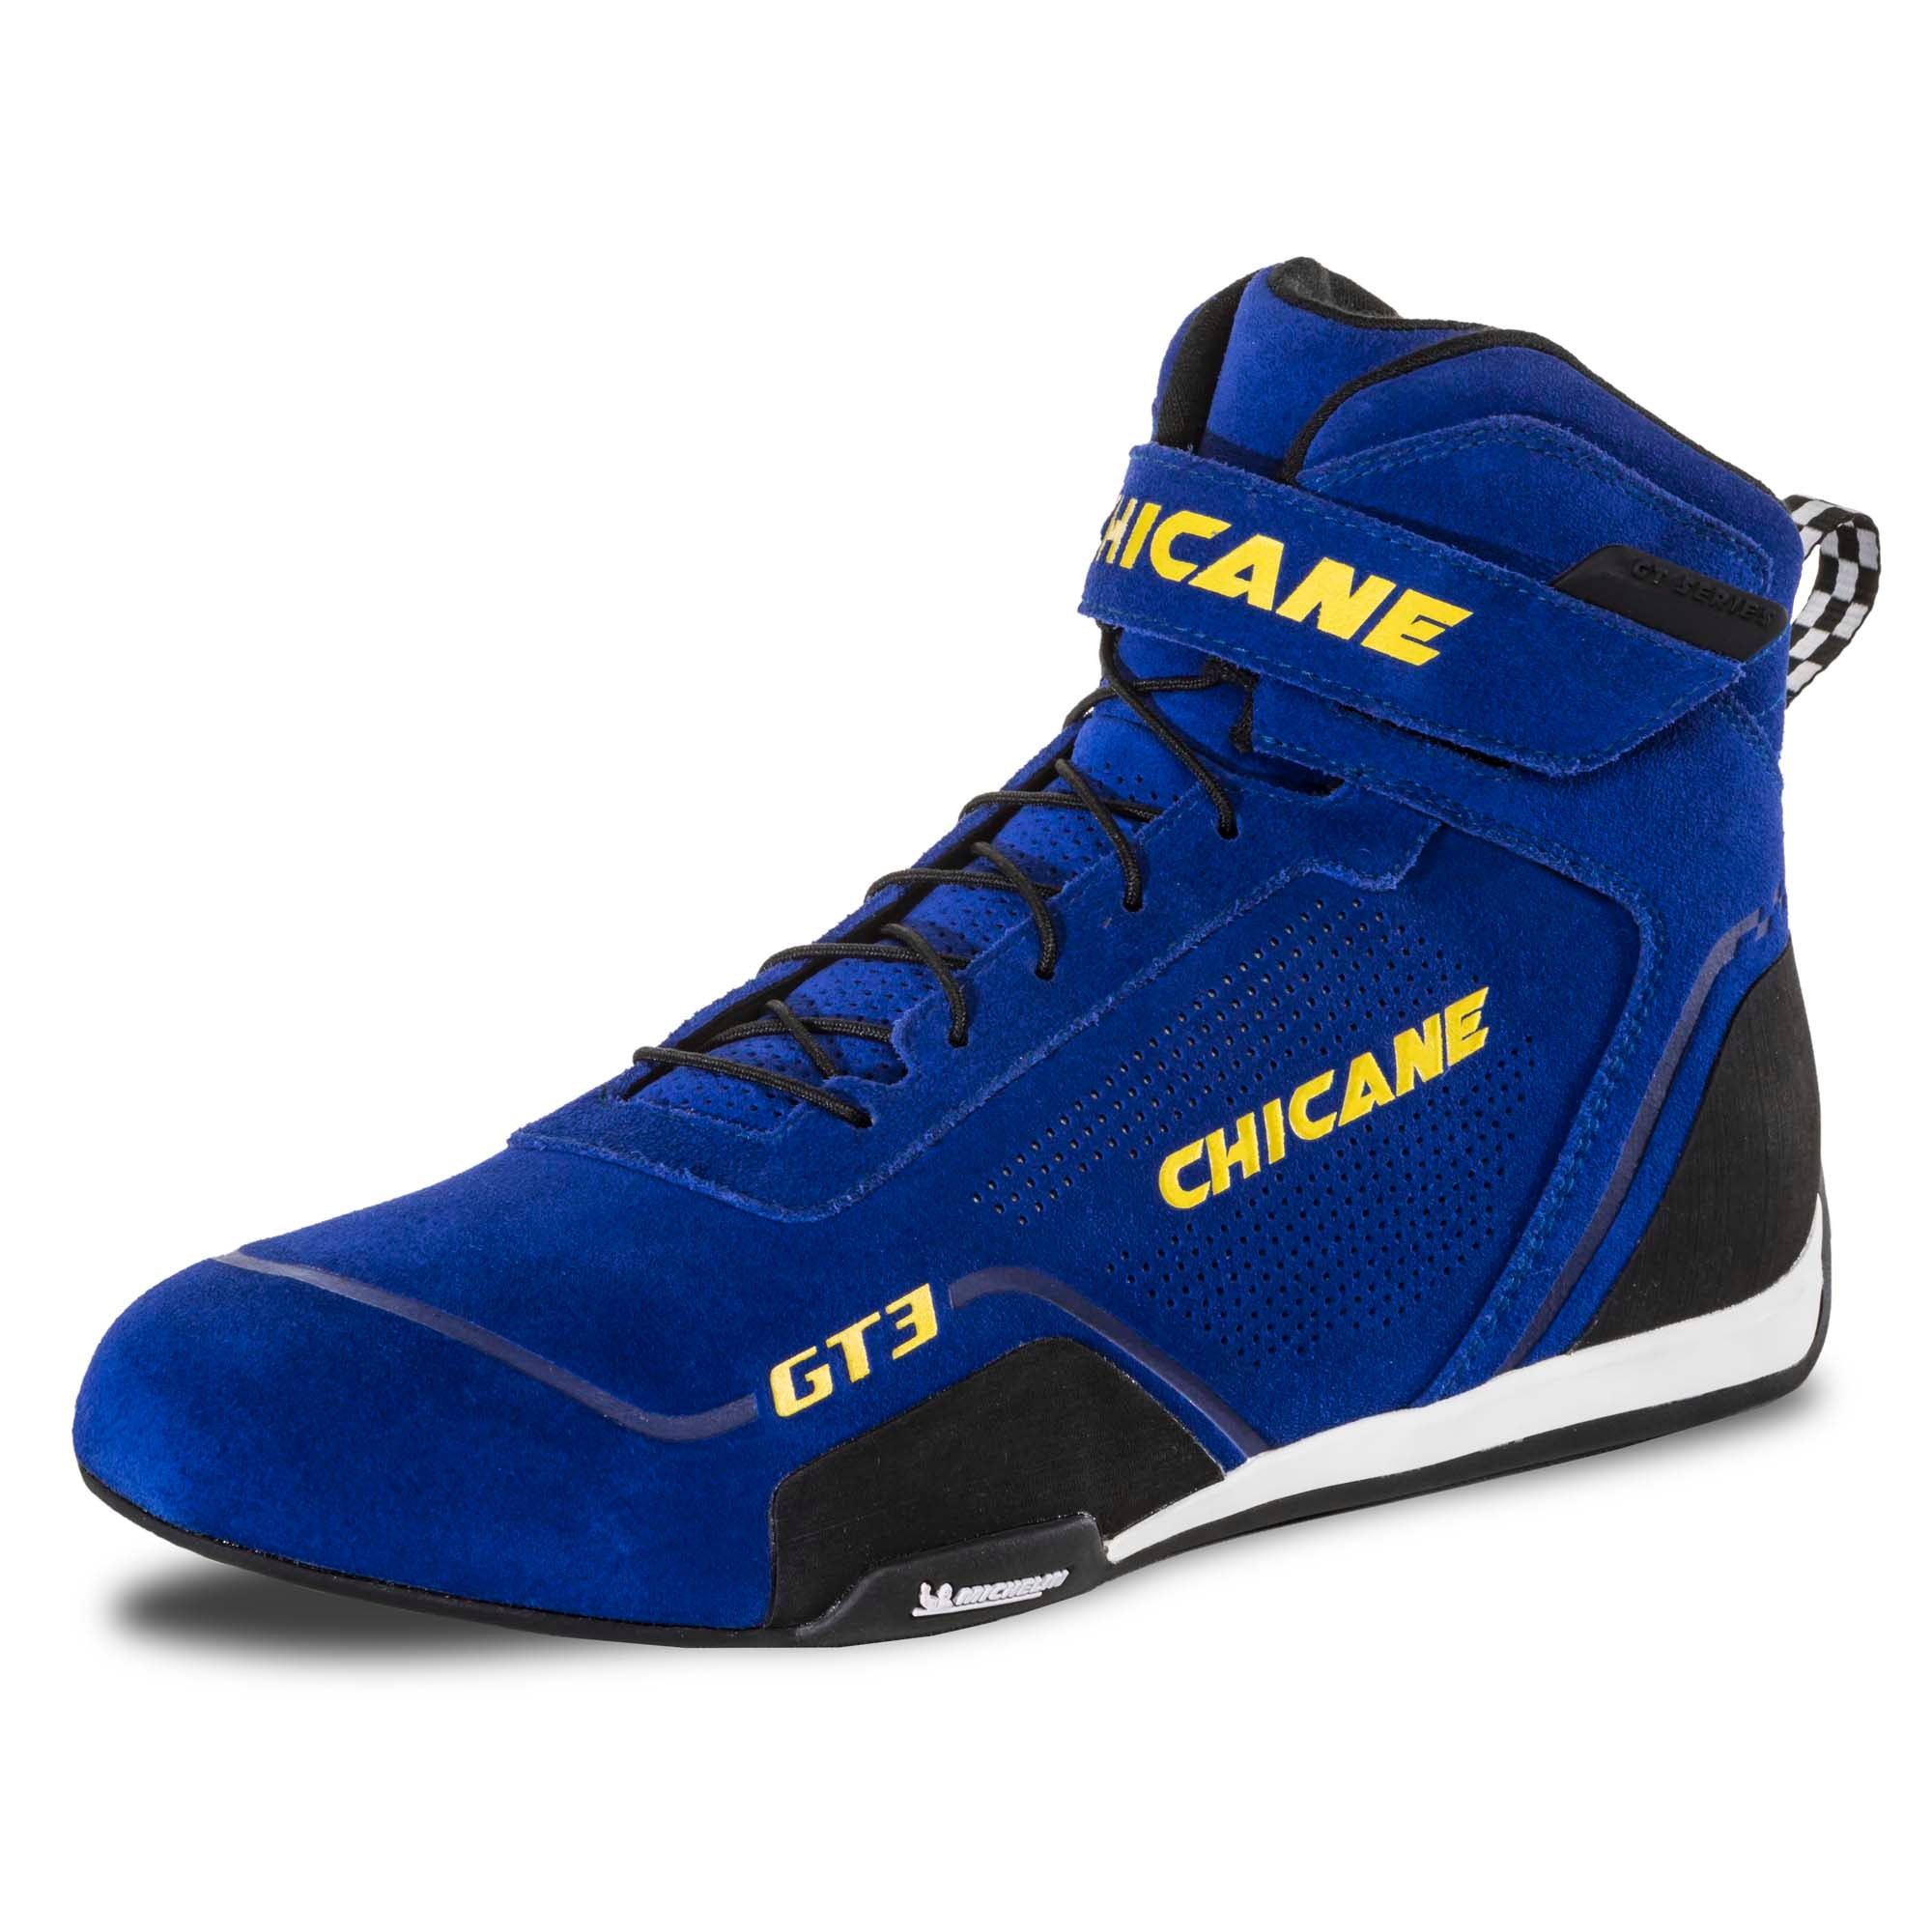 Chicane GT3 Racing Shoes